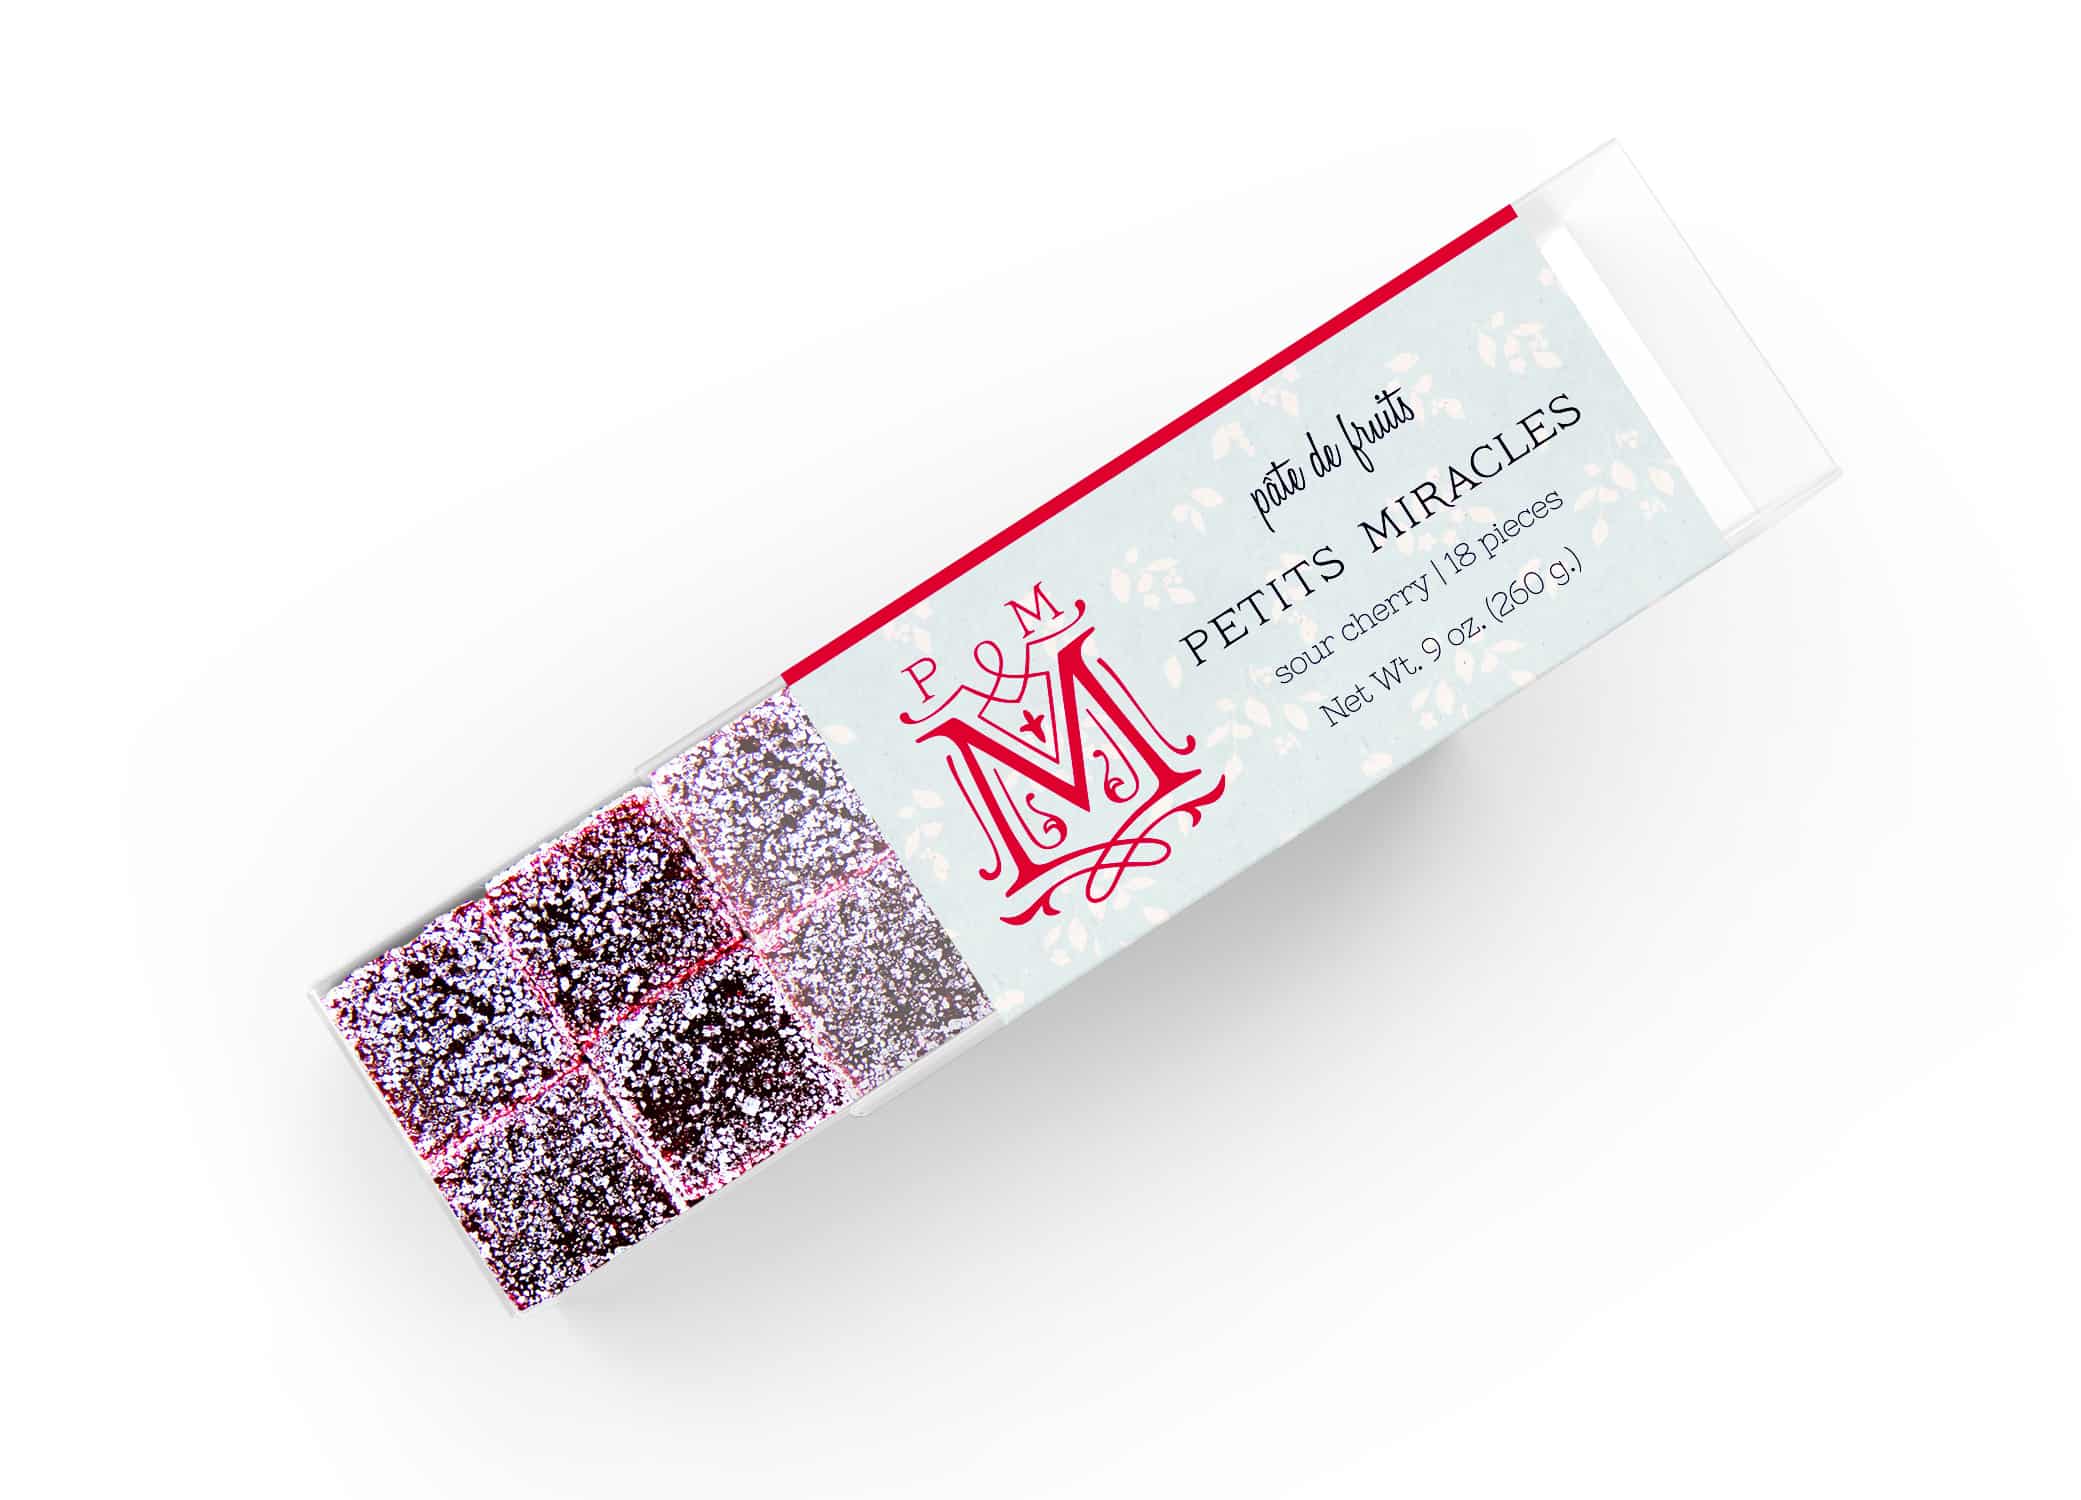 Petits Miracles packaging design with pate de fruits in the box and swirls around "M" icon next to type.